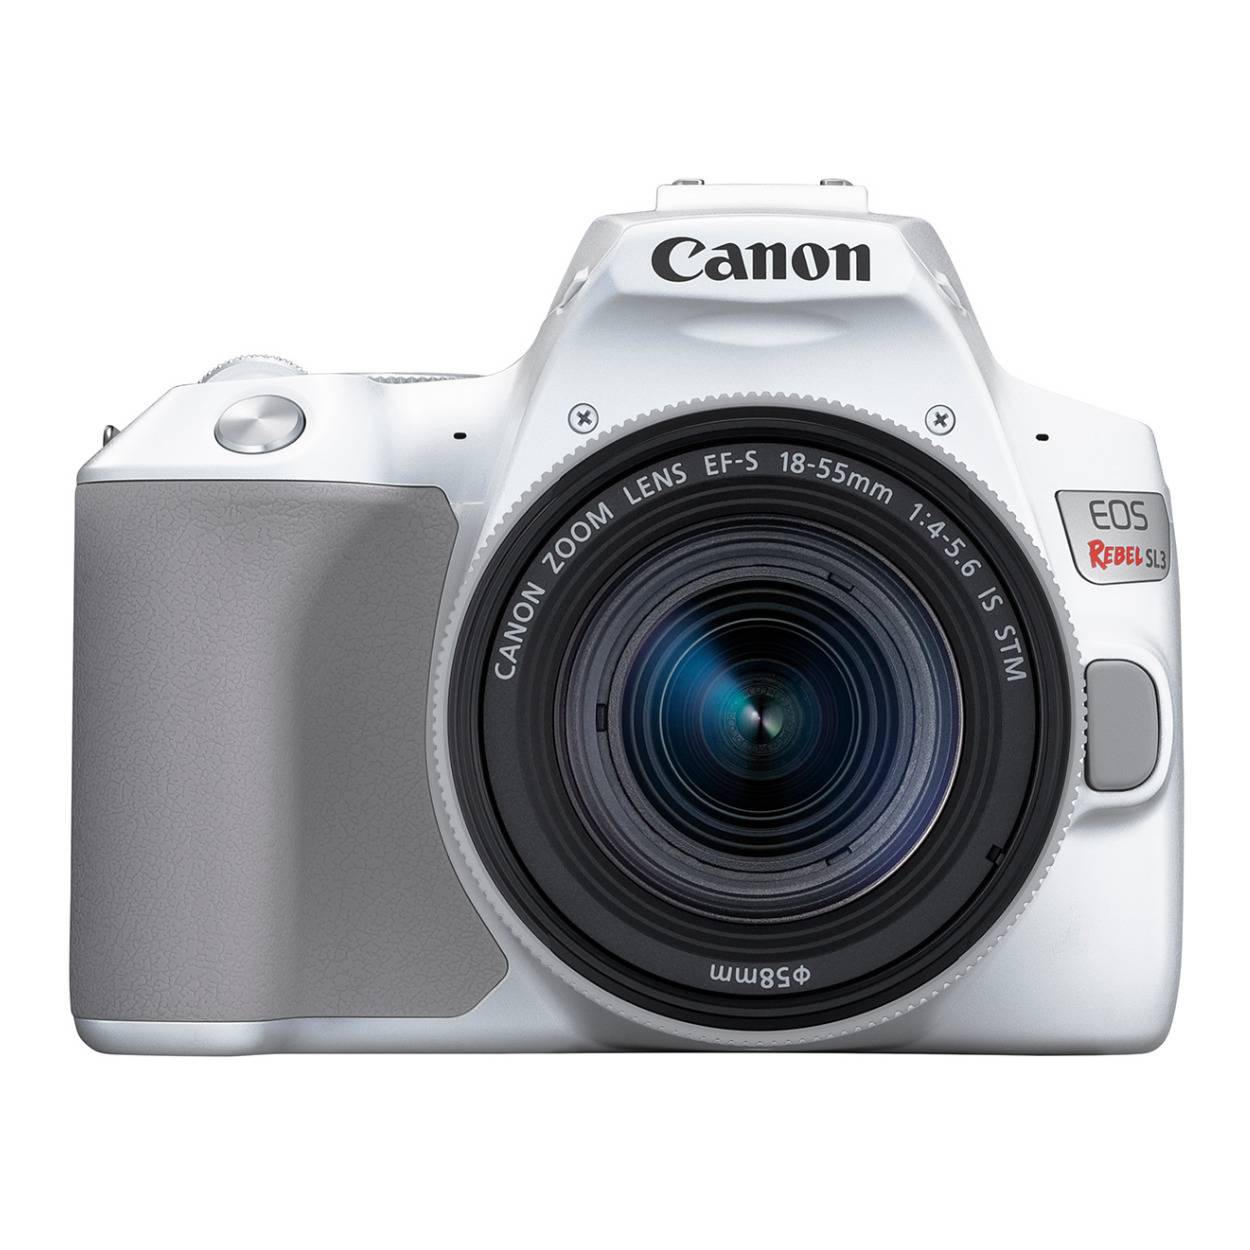 Canon EOS Rebel SL3 DSLR Camera with EF-S 18-55mm f/4-5.6 IS STM Lens (White)